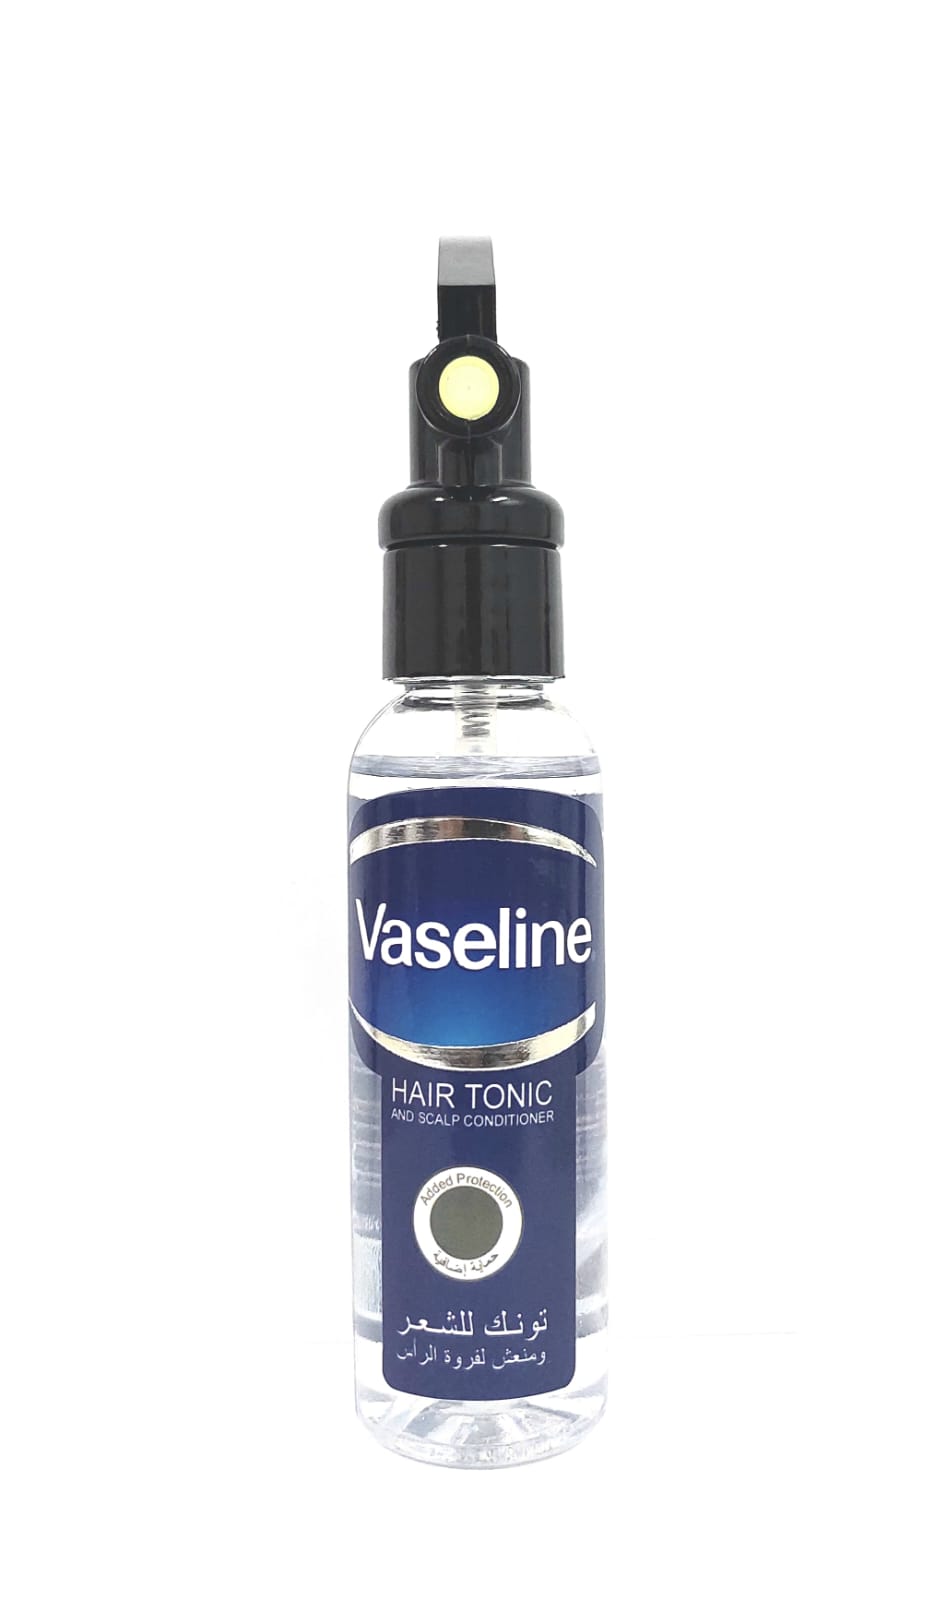 Vaseline Hair Tonic And Scalp Conditioner -70ml